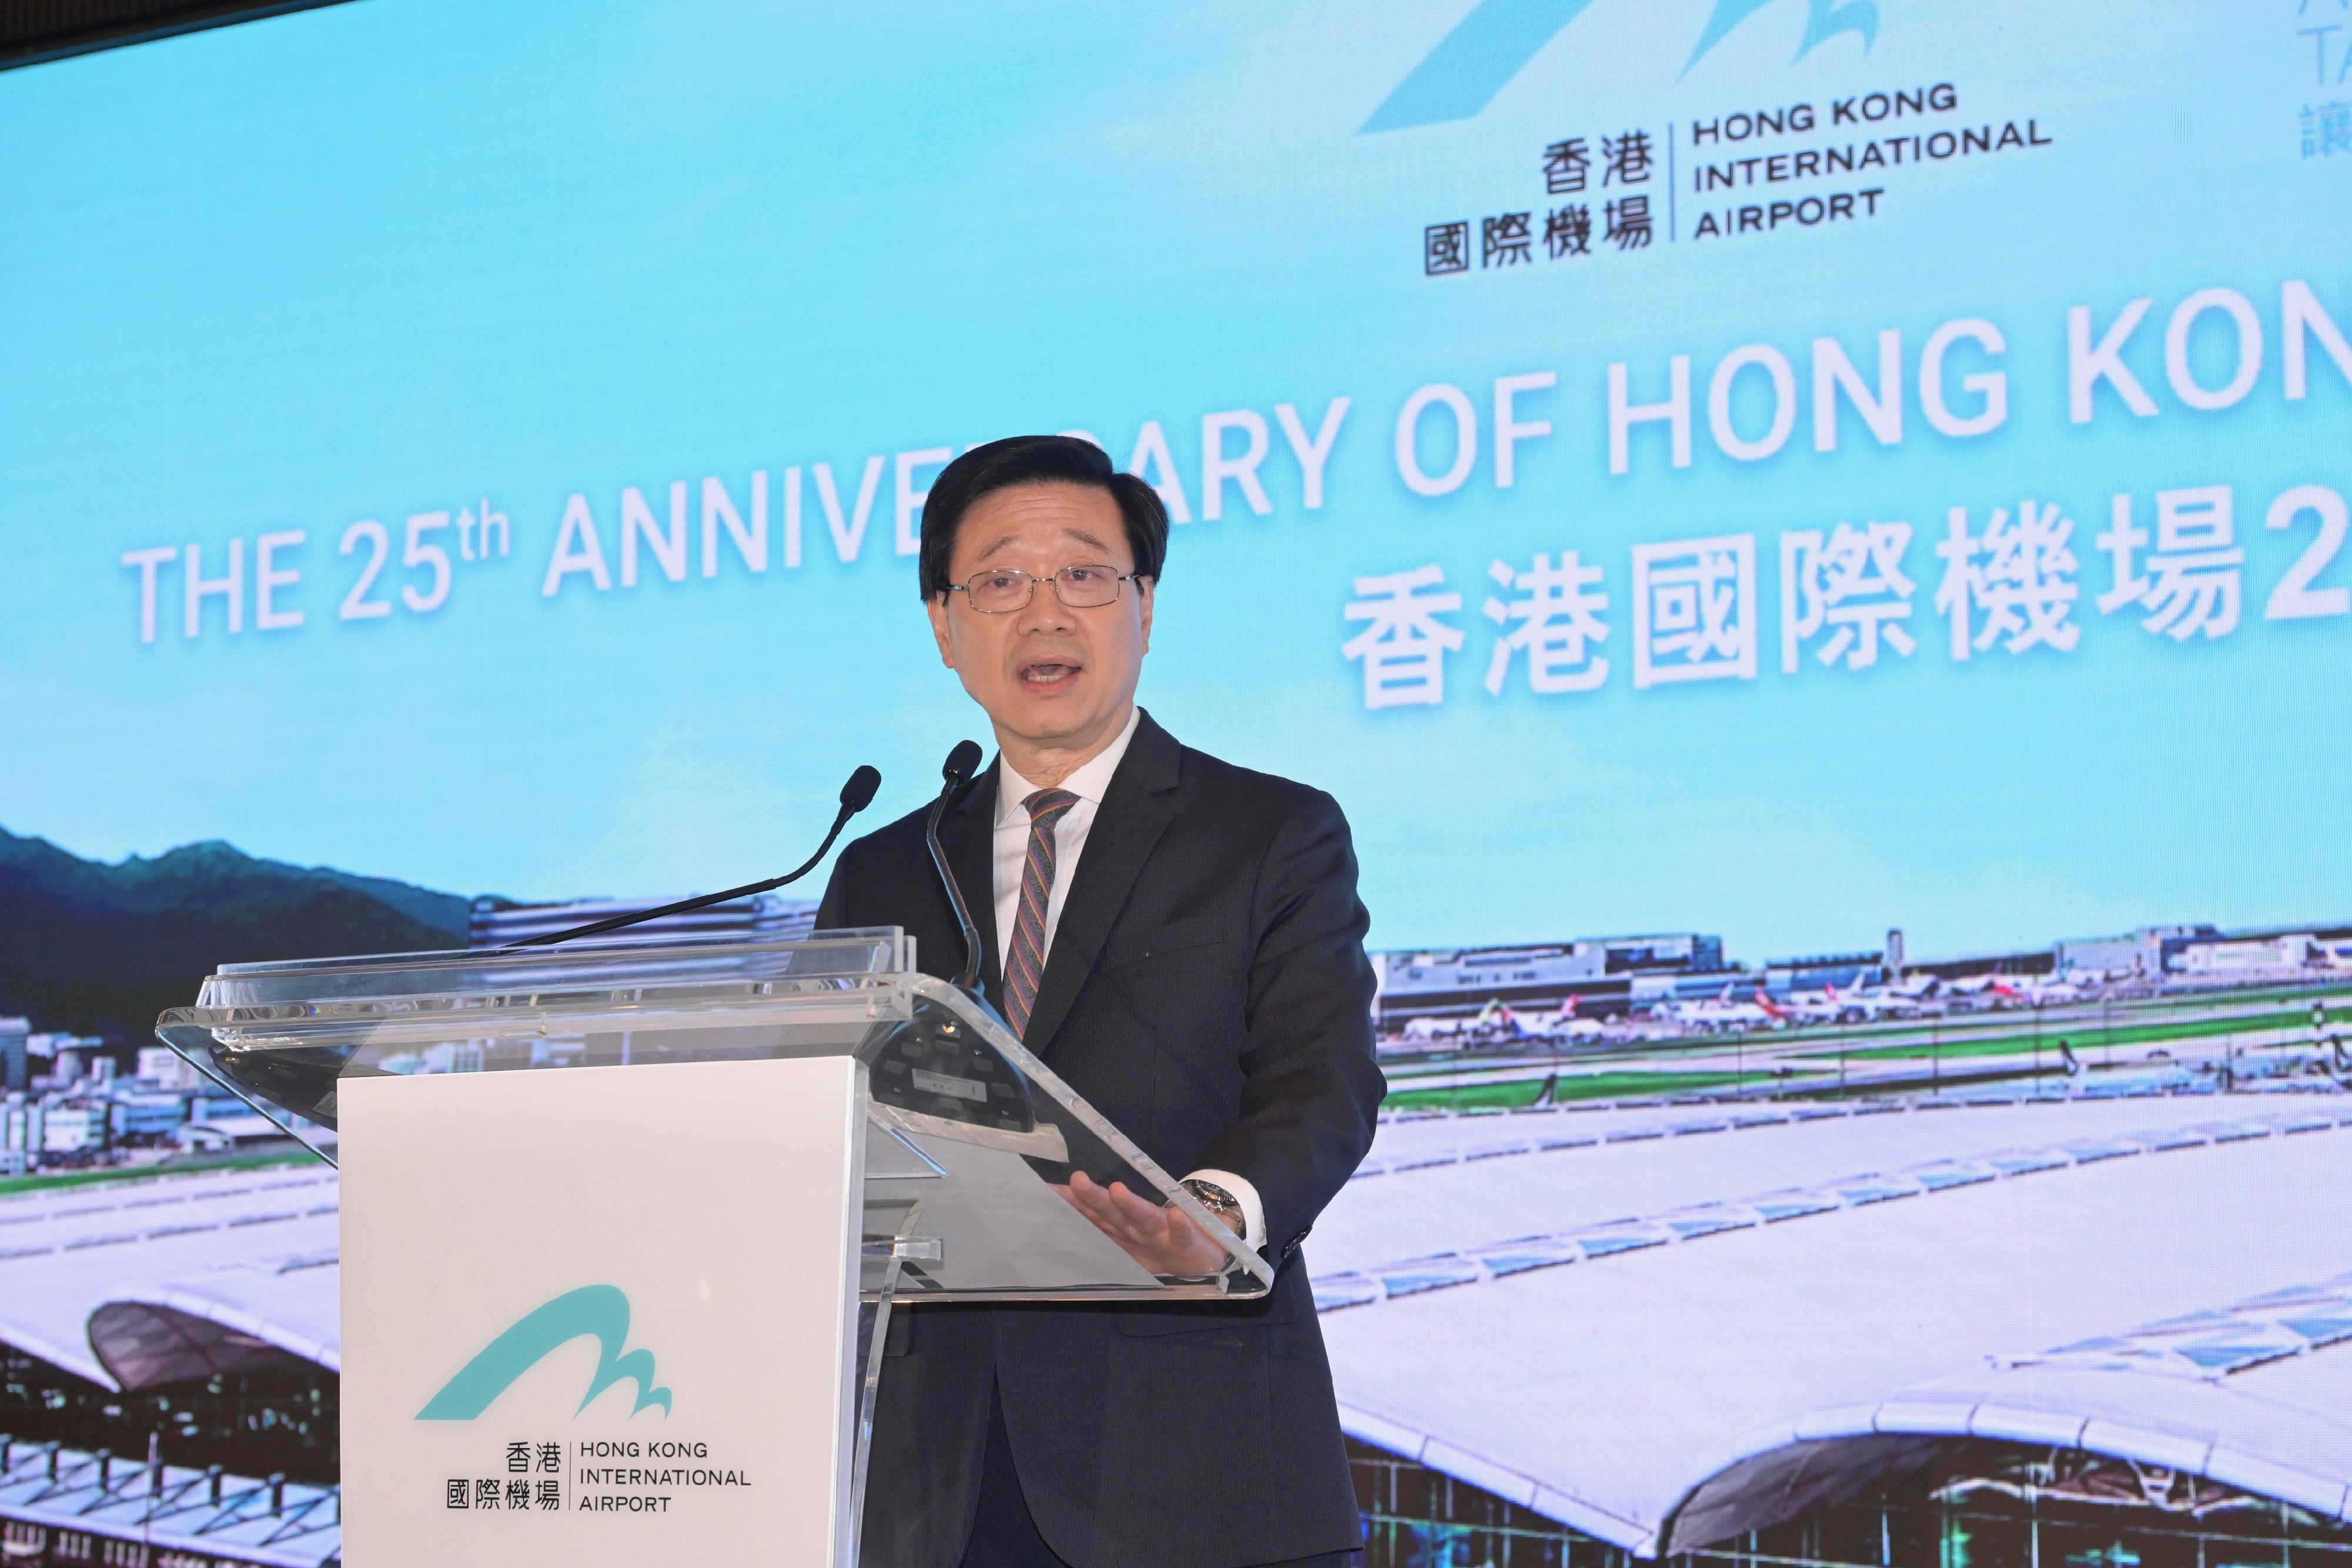 The Chief Executive, Mr John Lee, speaks at the cocktail reception in celebration of the 25th anniversary of Hong Kong International Airport today (July 10).